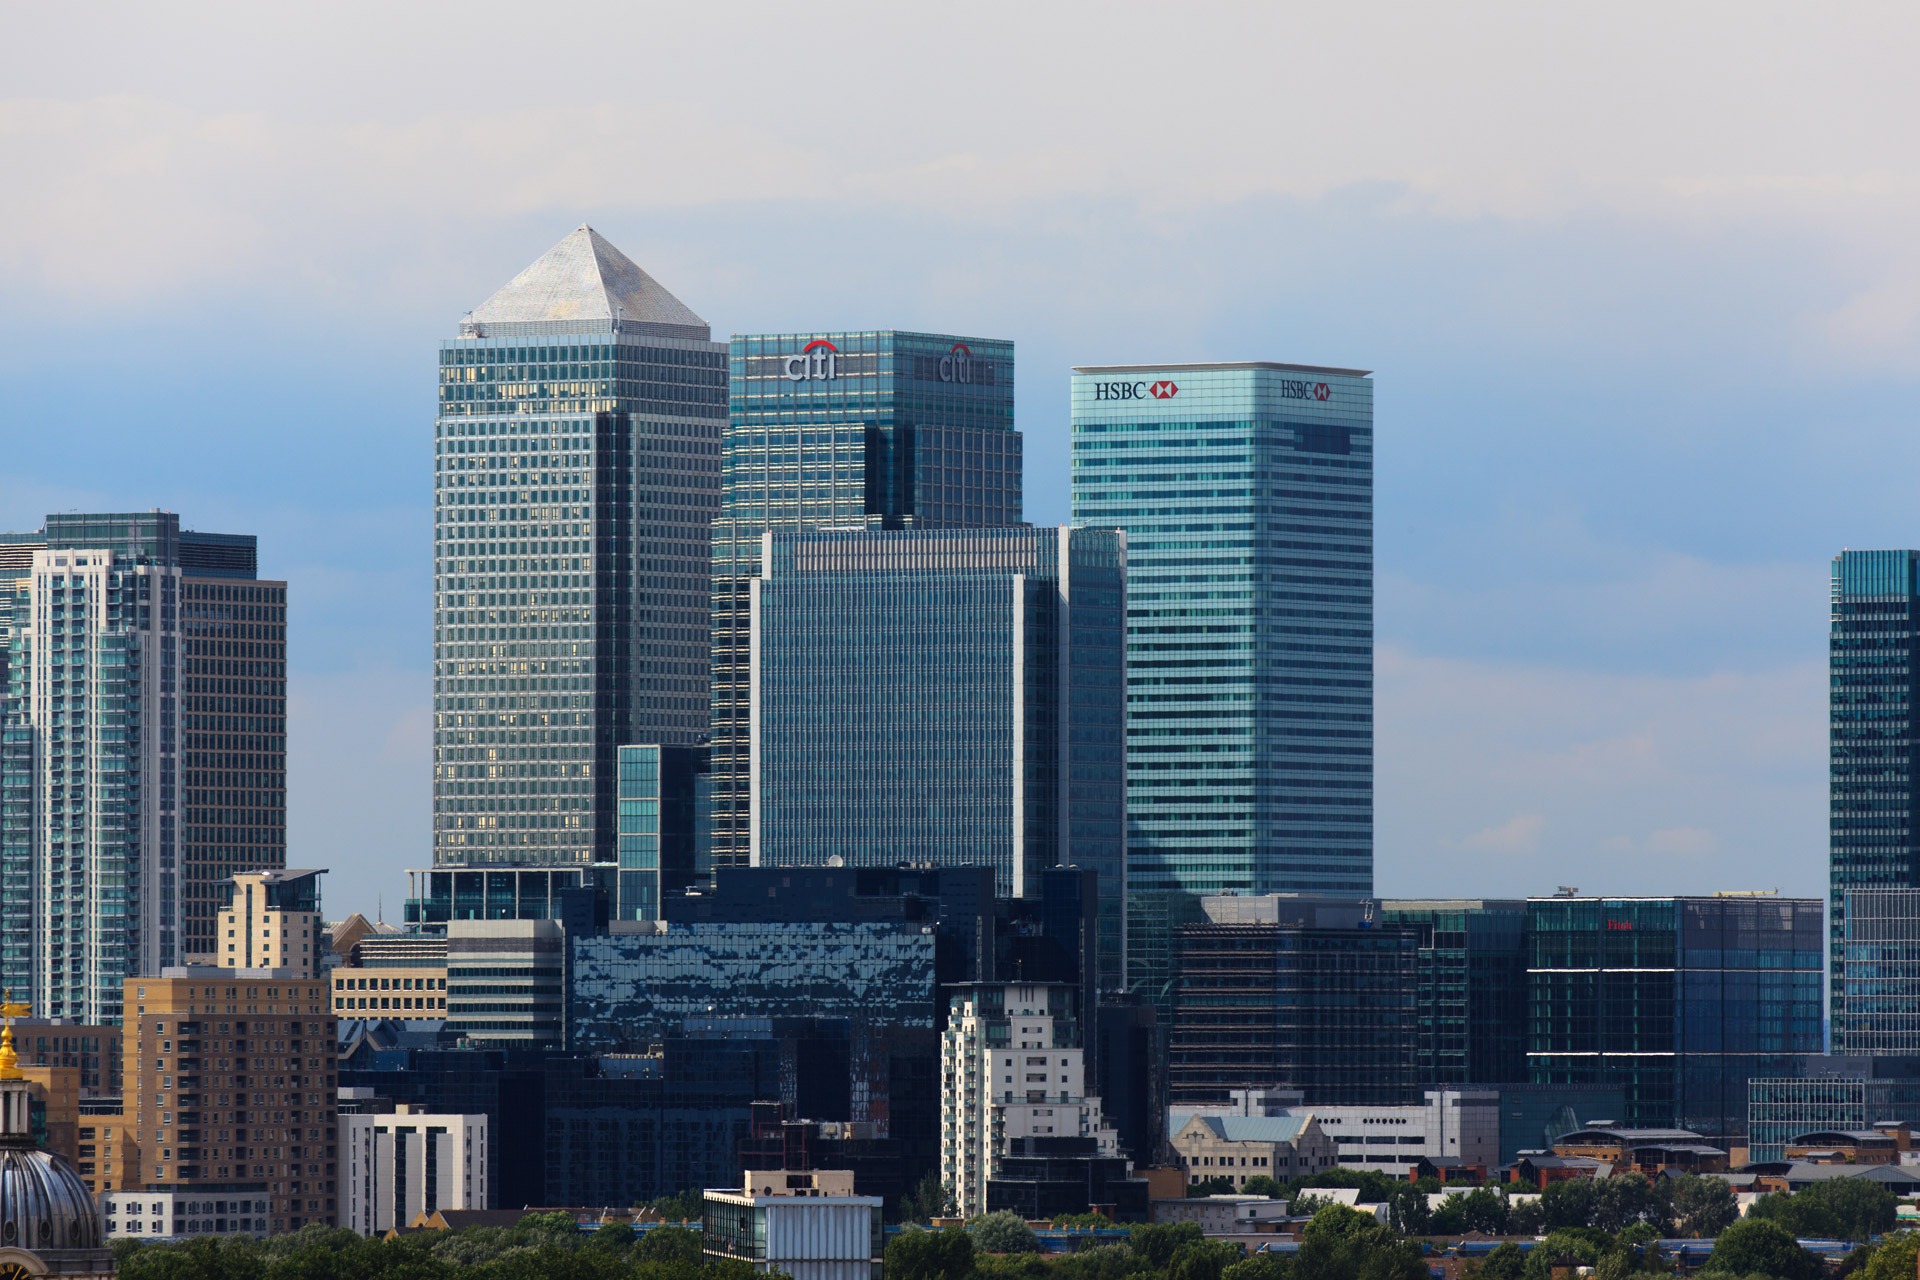 Landscape of Canary Wharf Buildings